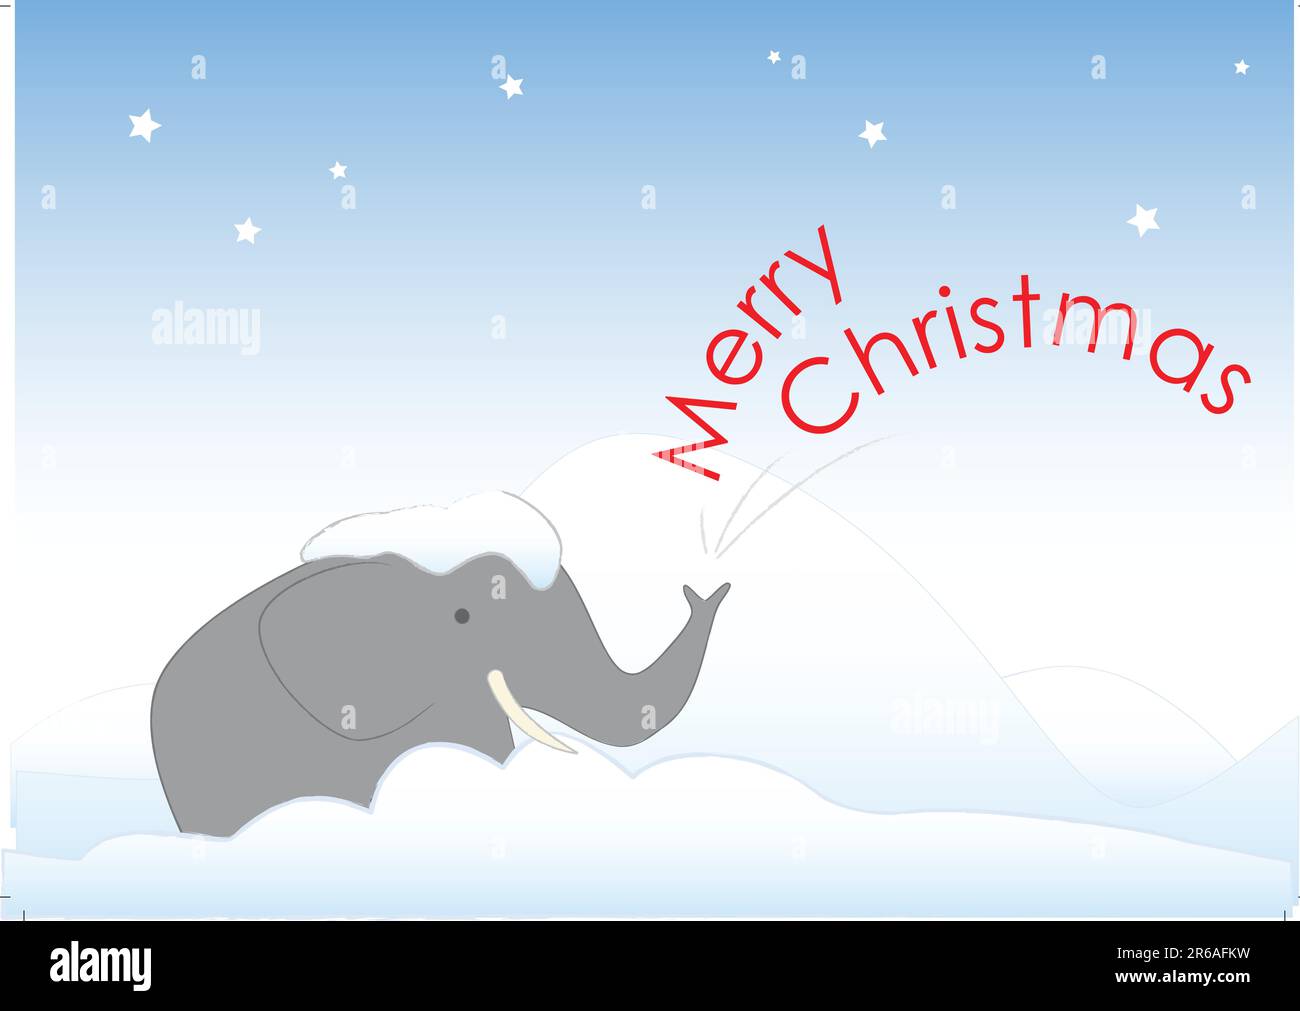 Mr. Elephant is stuck in the snow. He wishes you a Merry Christmas. He also wishes to be taken in from the cold and given a big drink of egg nog. Stock Vector